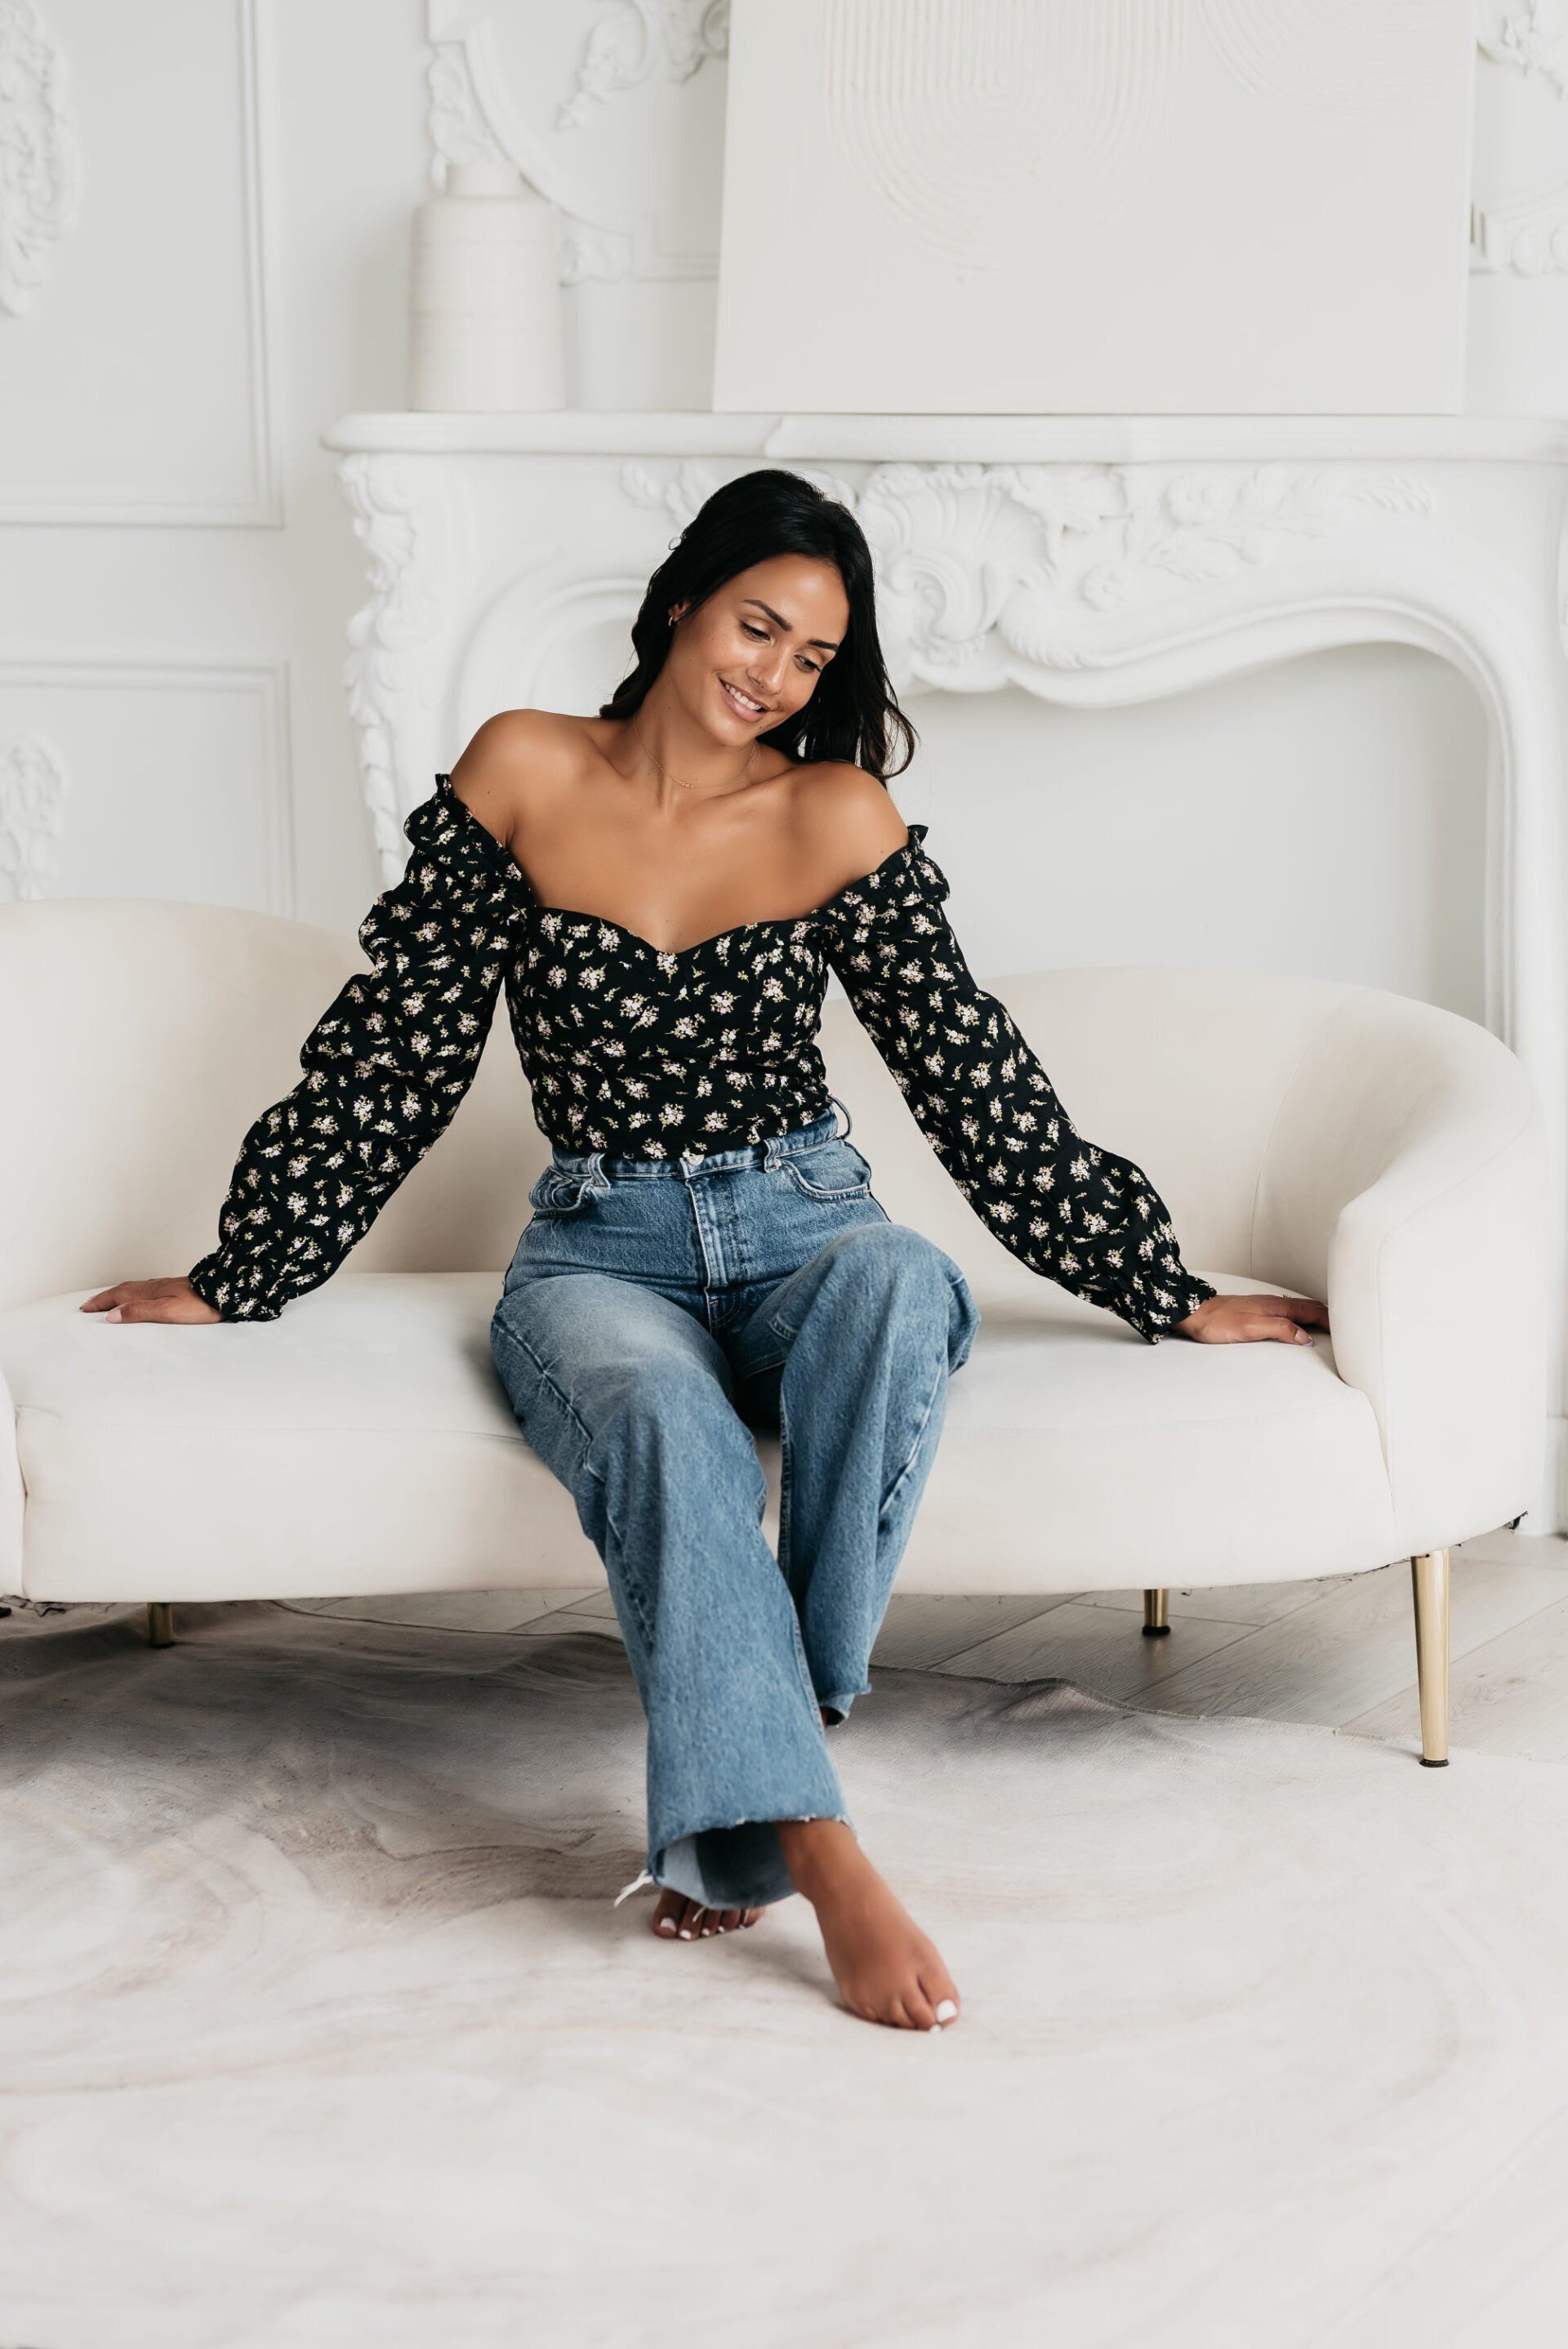 A young professional wearing a black off shoulder top and jeans sitting in an all-white luxury lounge set up